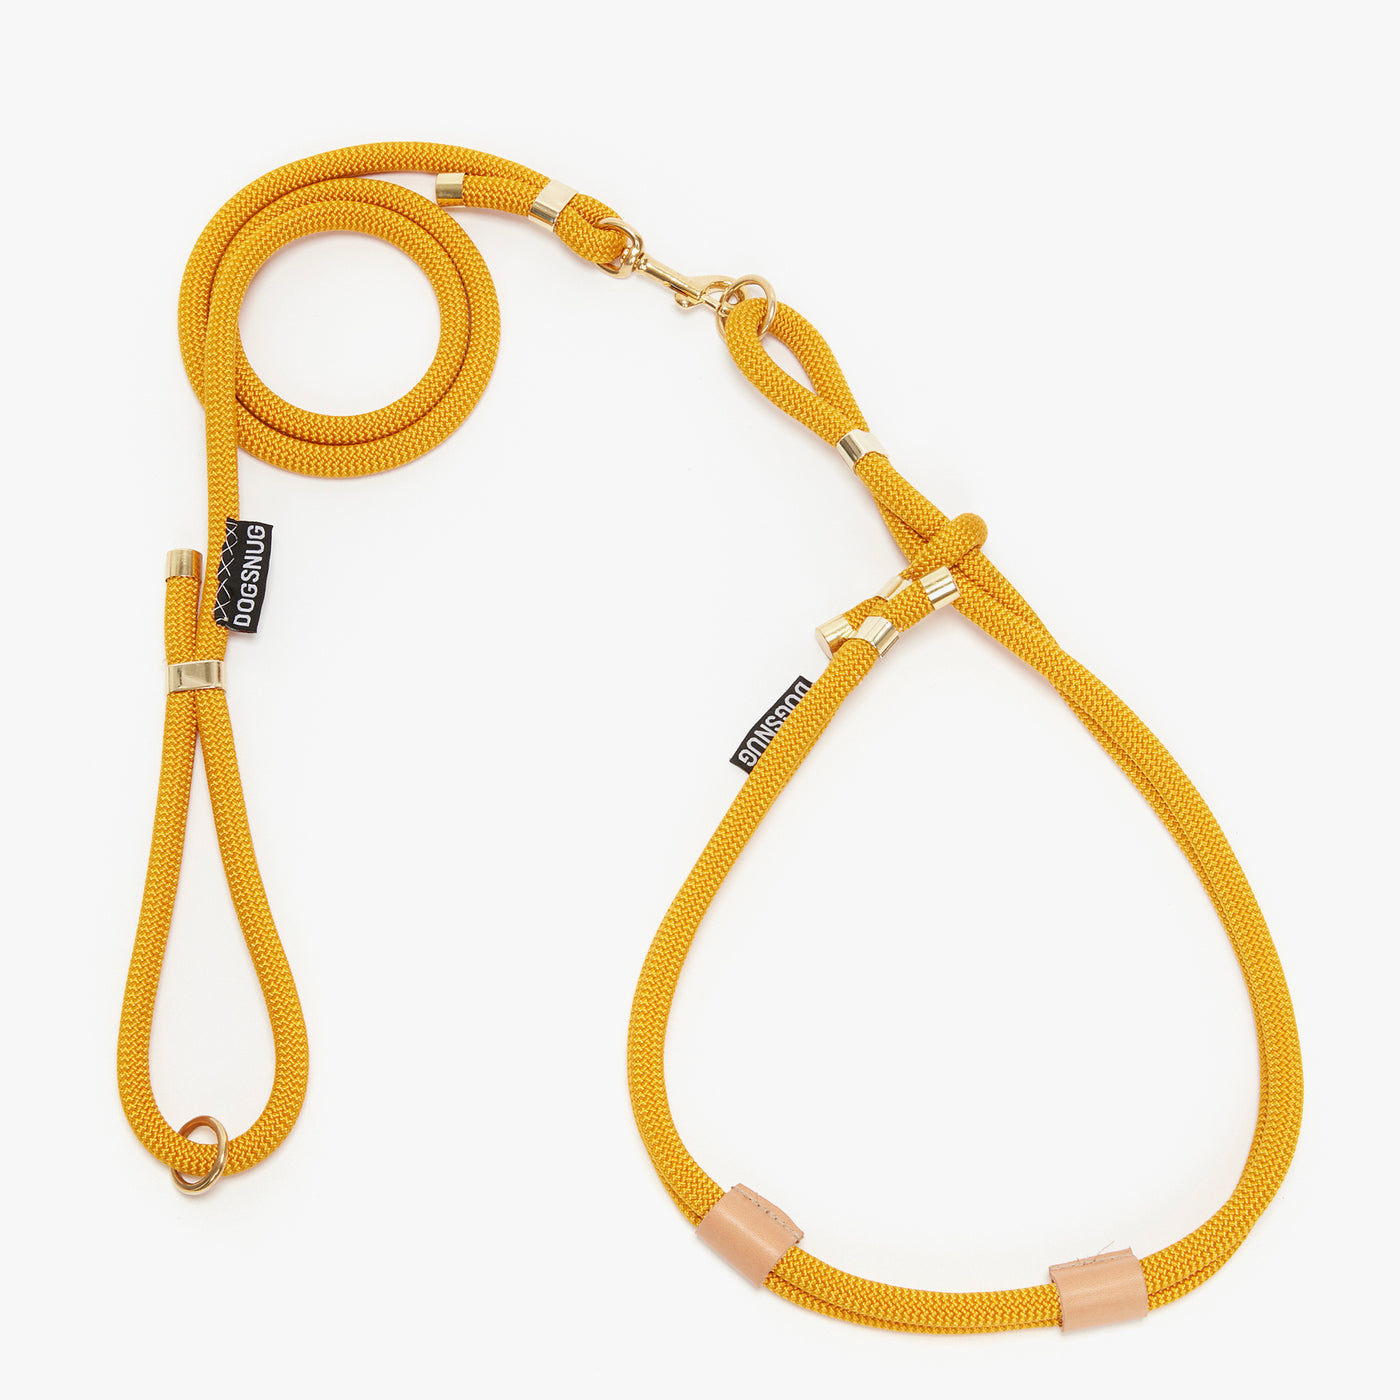 Dog harness in yellow rope with matching dog lead